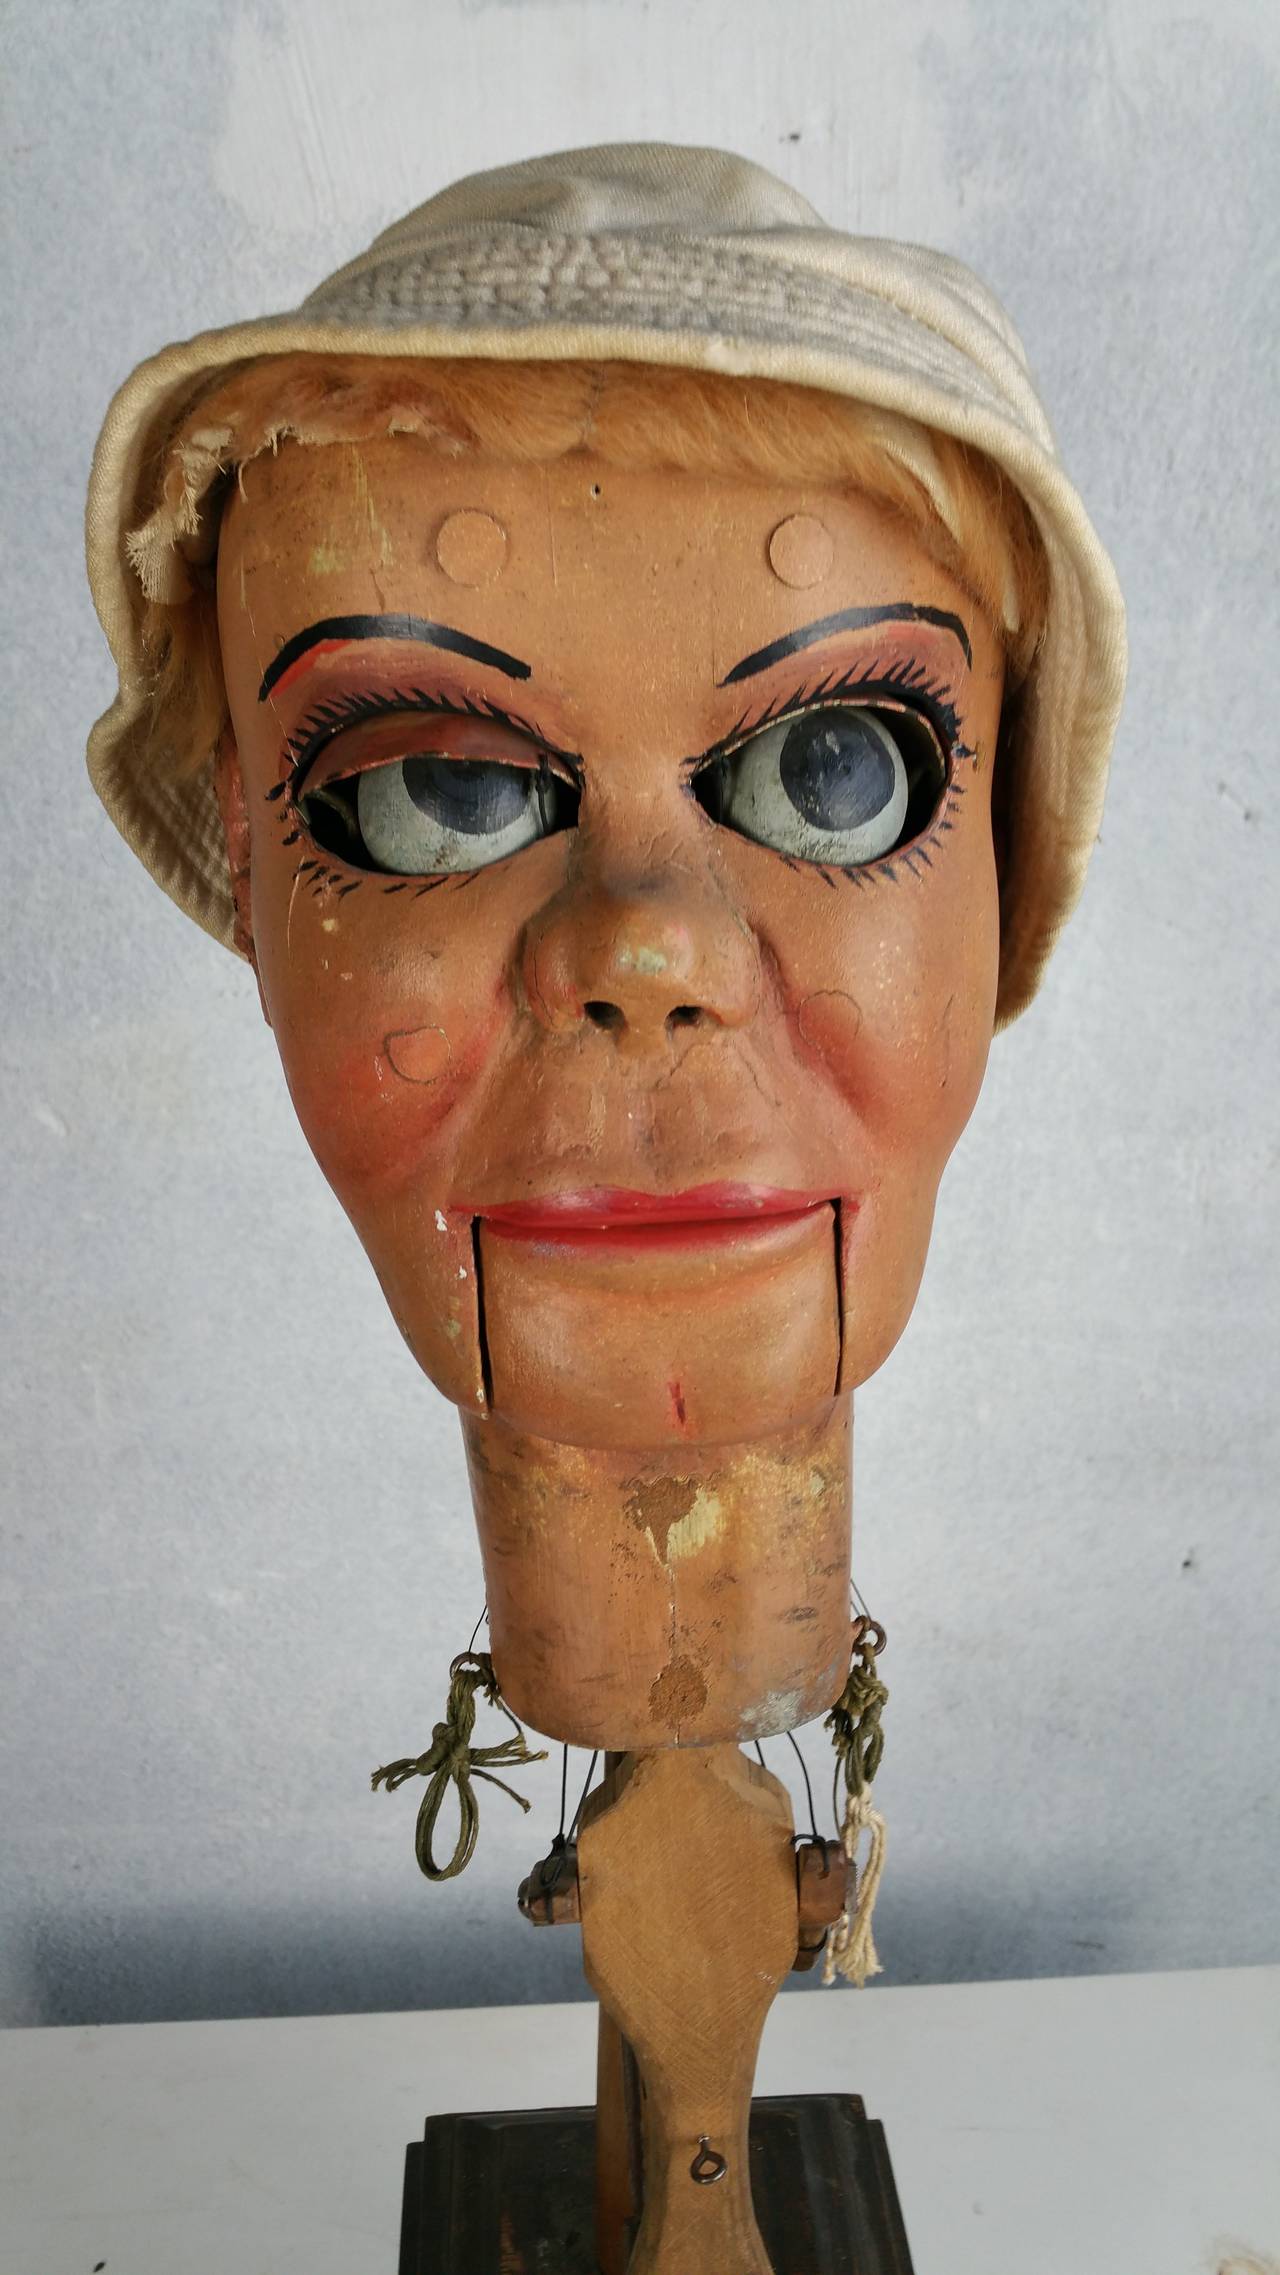 Hand-Crafted Early Ventriloquist Doll Head with Moving Eyes, Eyebrows, and Mouth